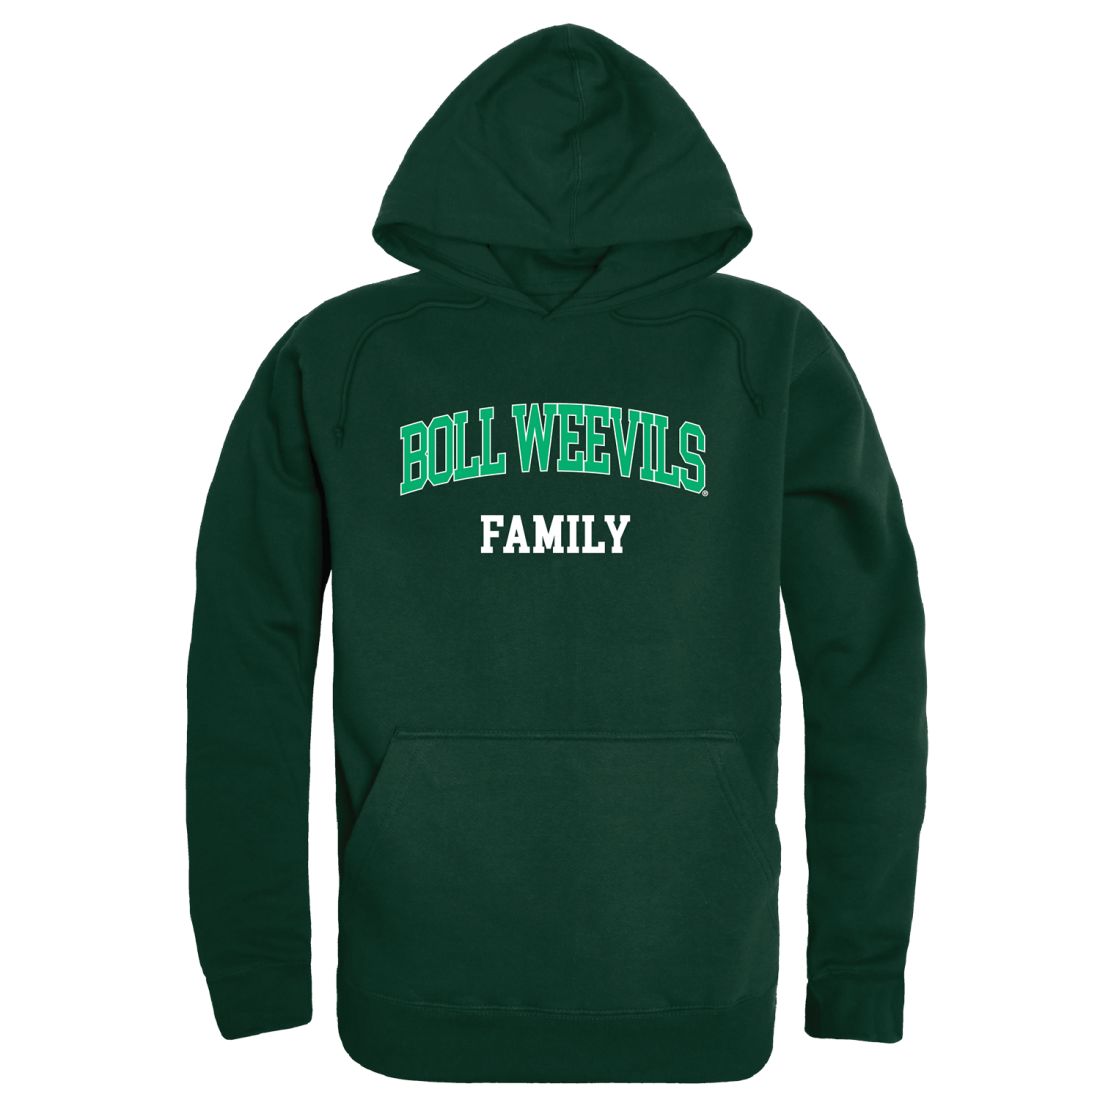 University of Arkansas at Monticello Boll Weevils & Cotton Blossoms Family Hoodie Sweatshirts